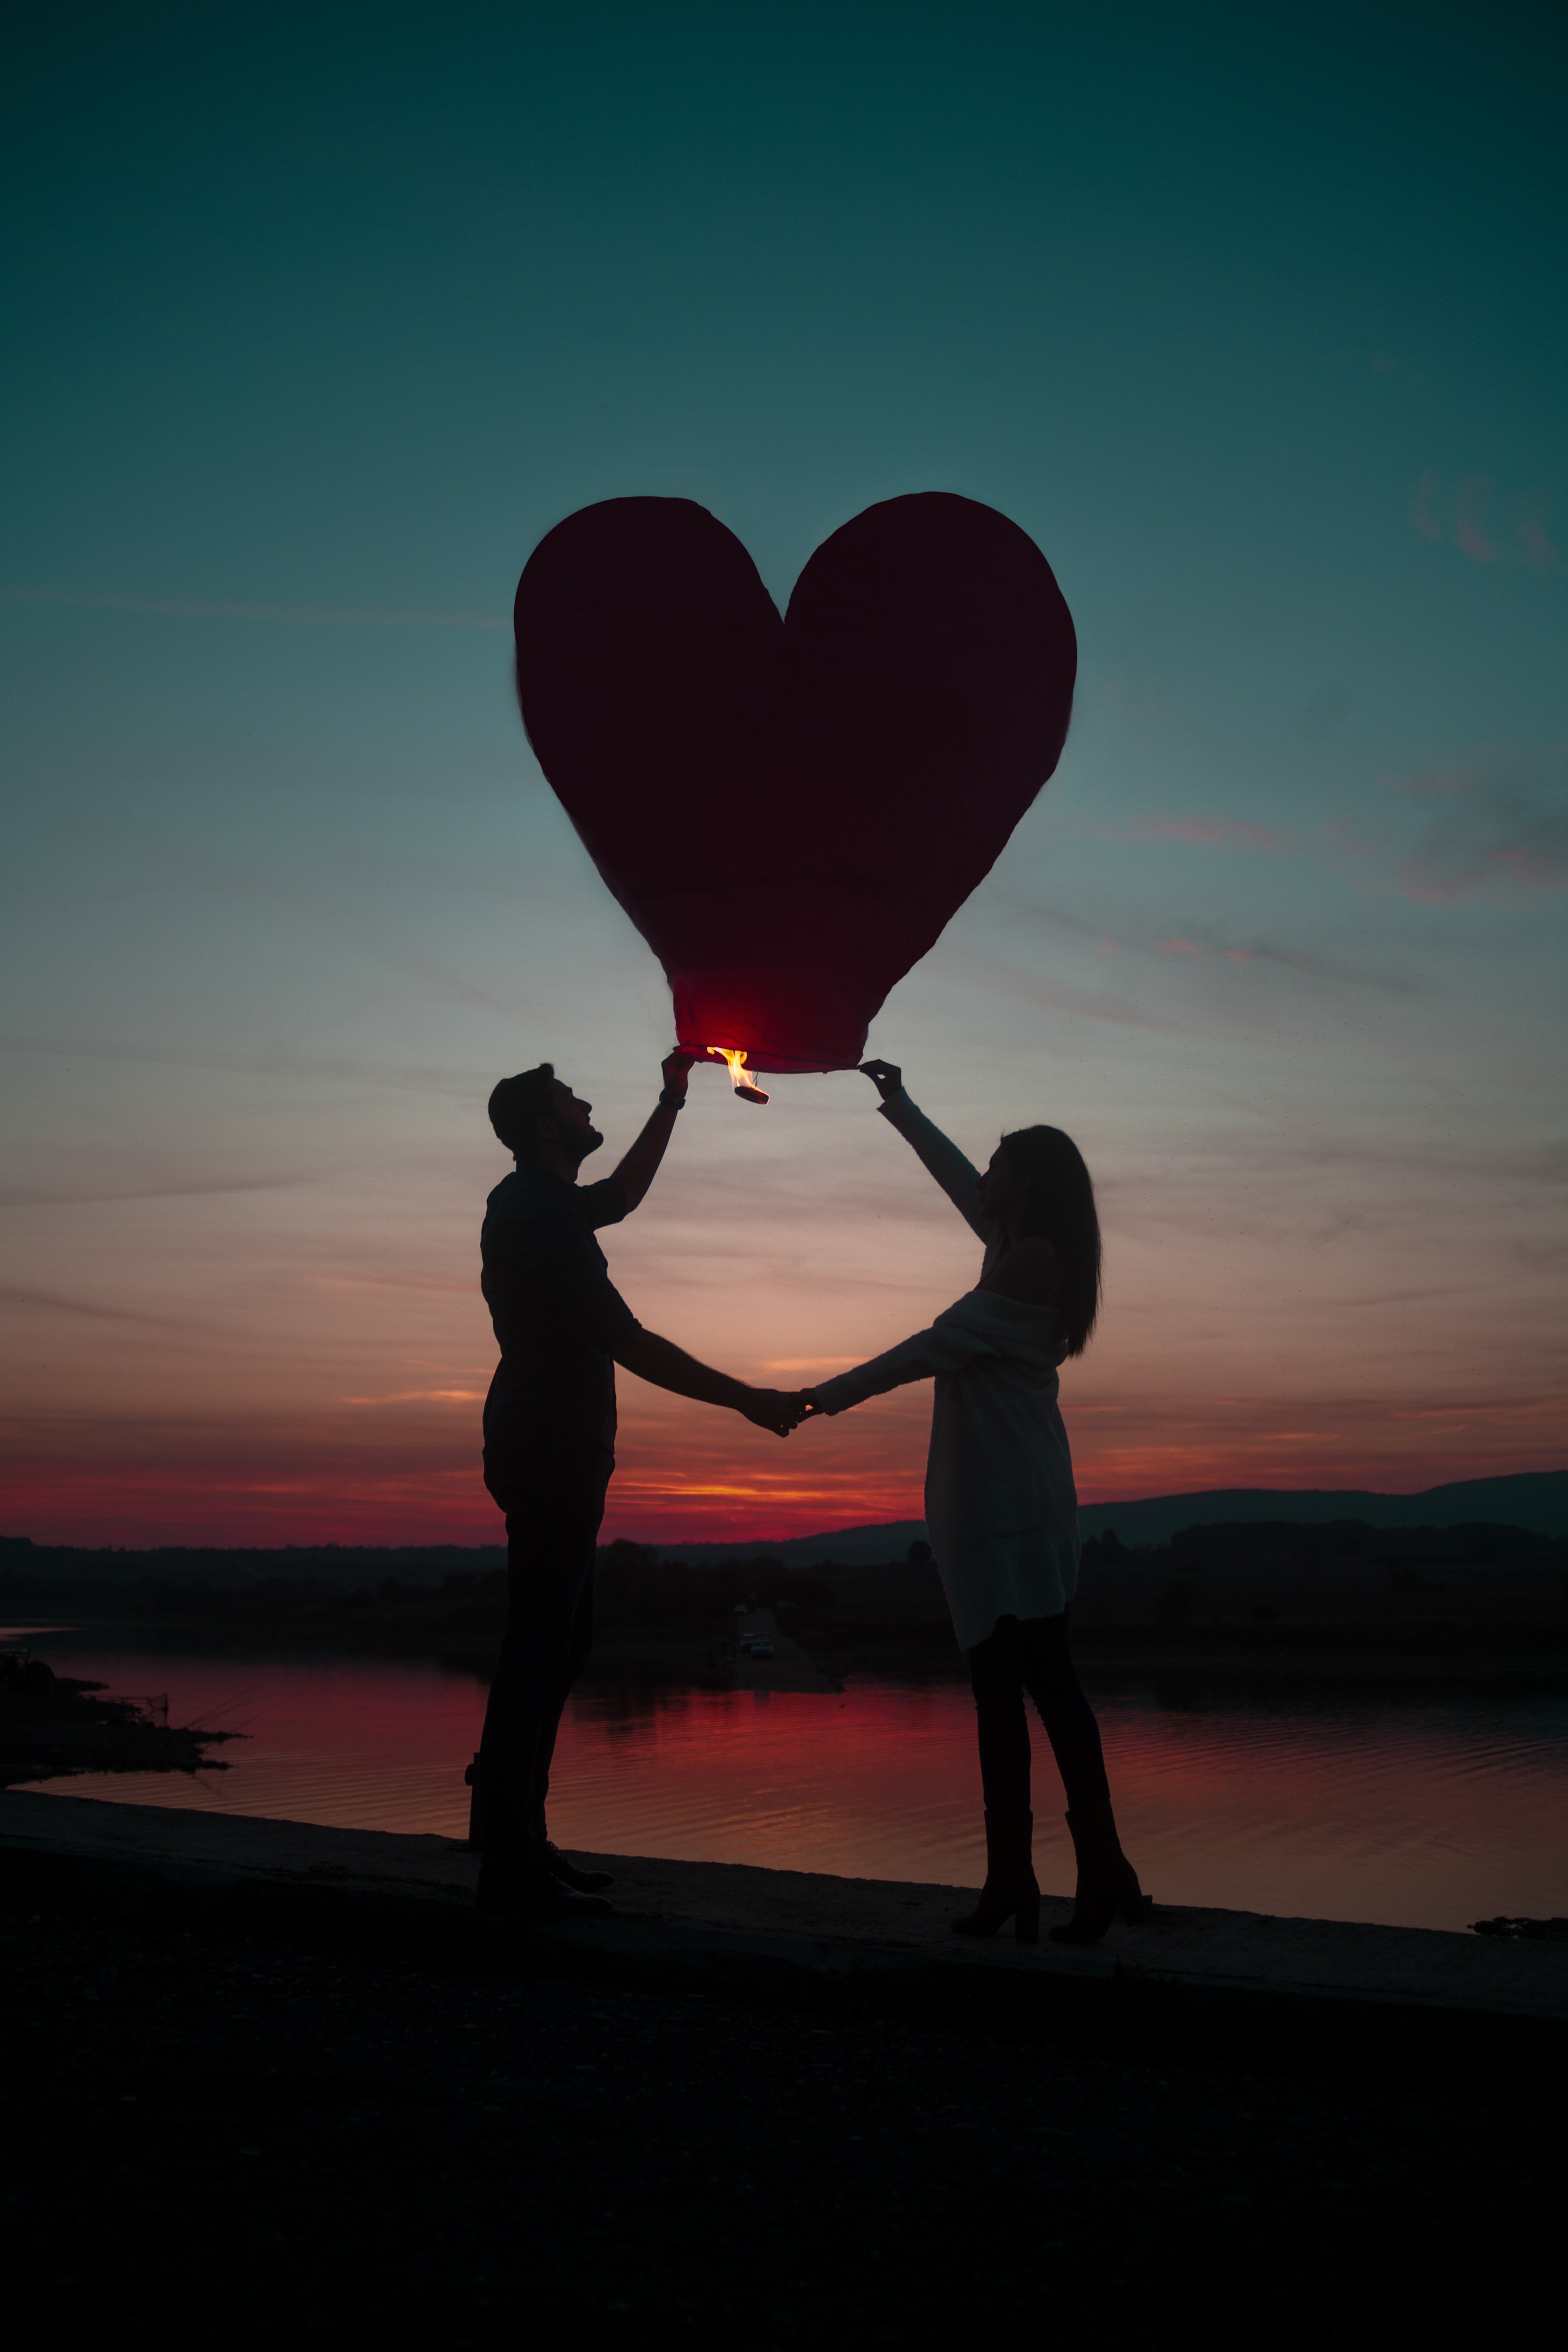 Silhouette Photo Of Man And Woman Holding Heart Lantern, Justifyyourlove, Water, Sunset, Silhouette, HQ Photo